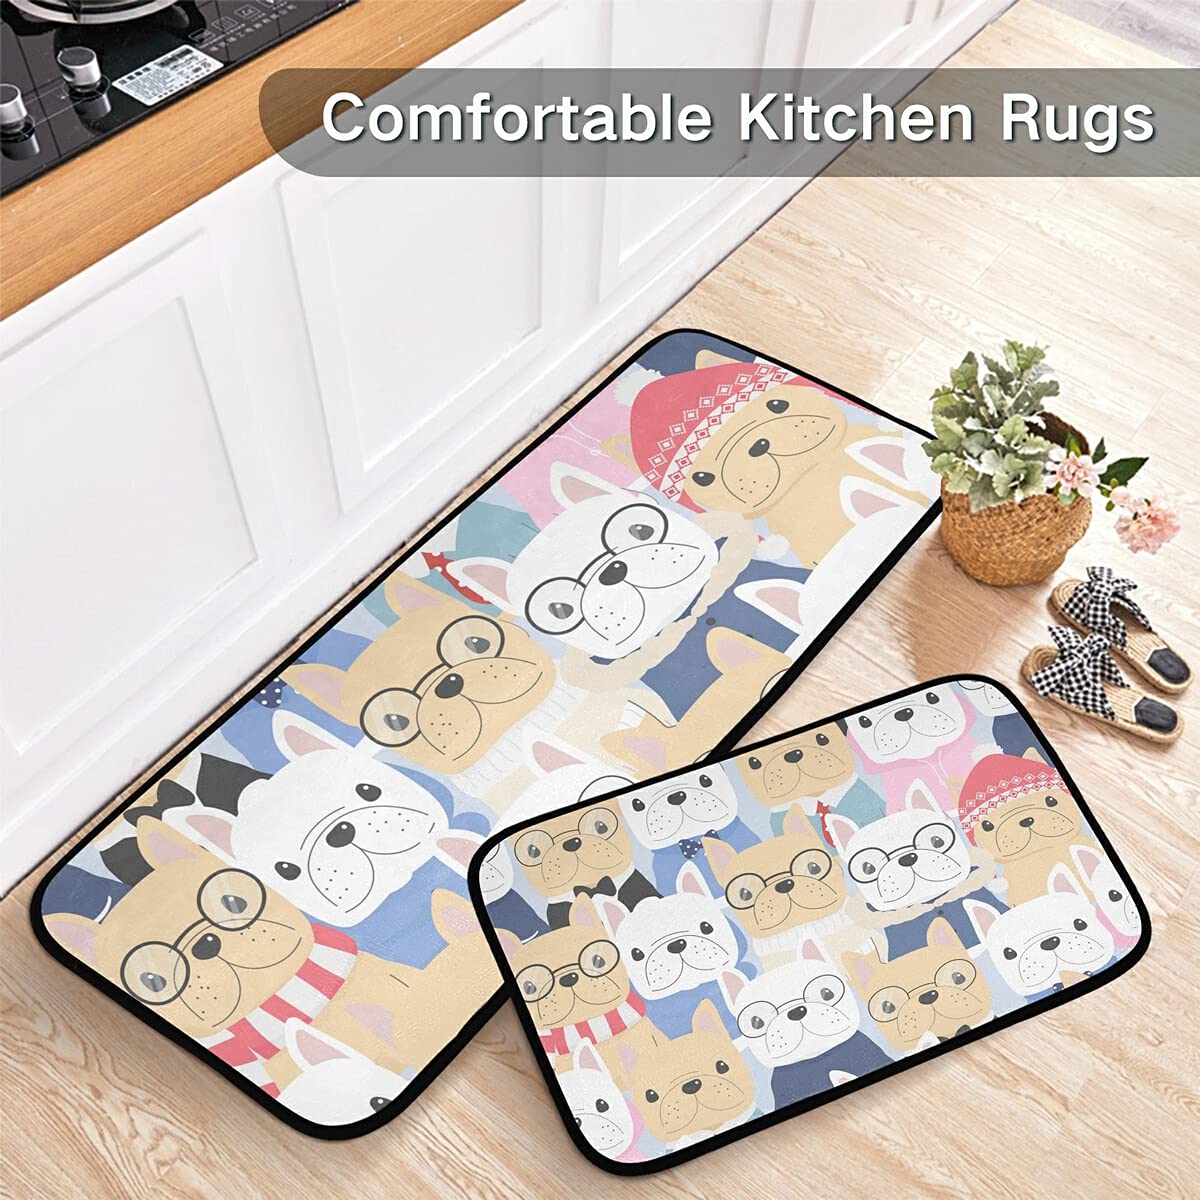 Emelivor Dog Kitchen Rugs and Mats Set 2 Piece Non Slip Washable Runner Rug Set of 2 for Floor Home Kitchen Laundry Decorative